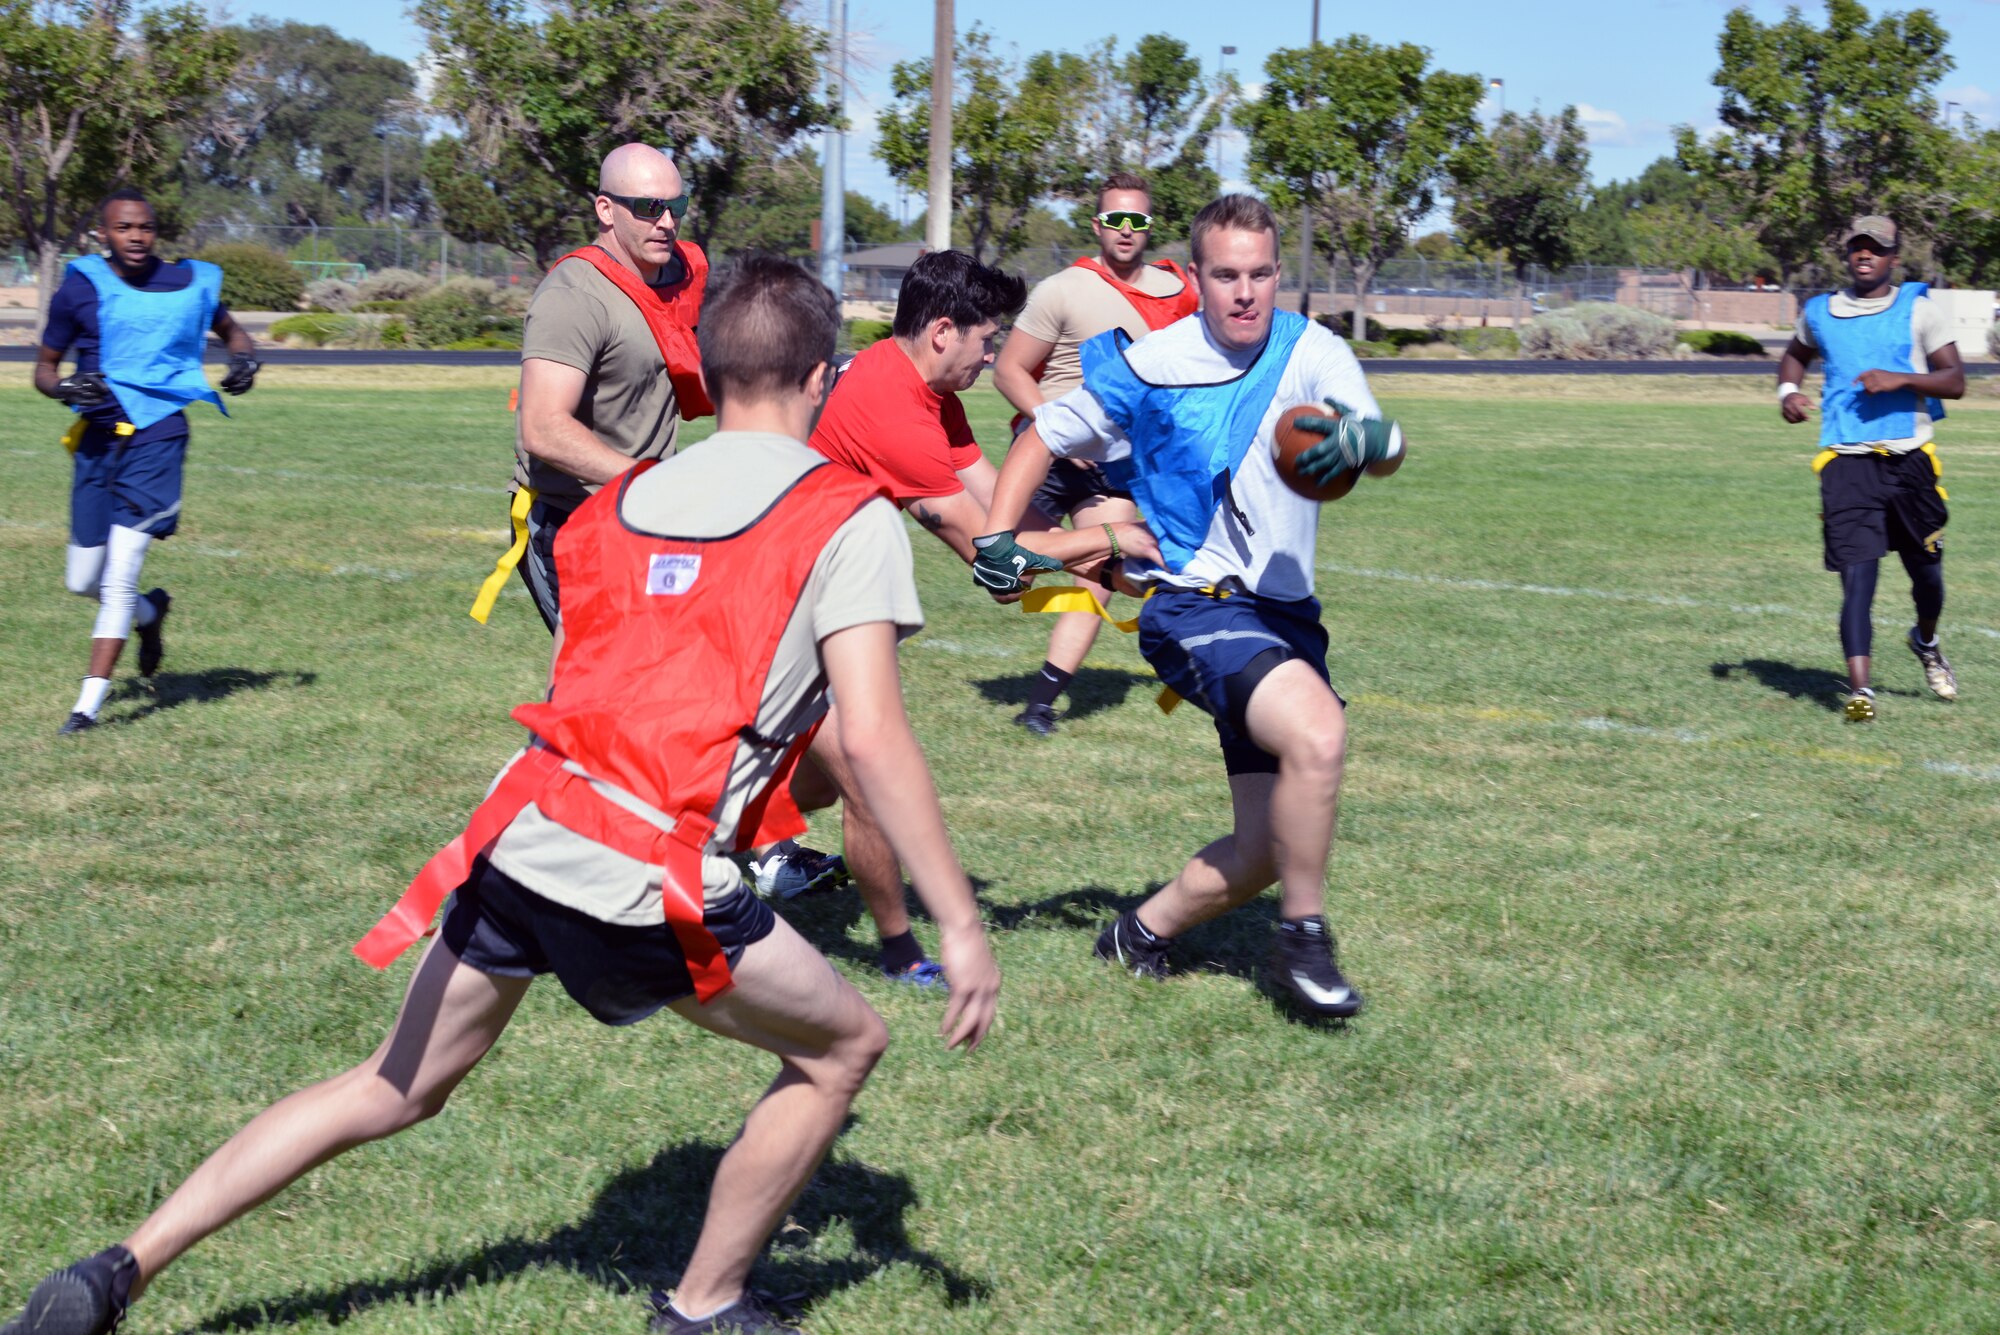 Members of the 58th Special Operations Wing play flag football during the 2019 58 SOW Sports Day at Kirtland Air Force Base, N.M., Sept. 27, 2019. Other sports played throughout the day included basketball, kickball, volleyball and more. The sports day included a competition between all the squadrons in the wing with top placements in every sport earning points for the unit. The 58th Aircraft Maintenance Squadron won the competition with almost double the points of the second place squadron.